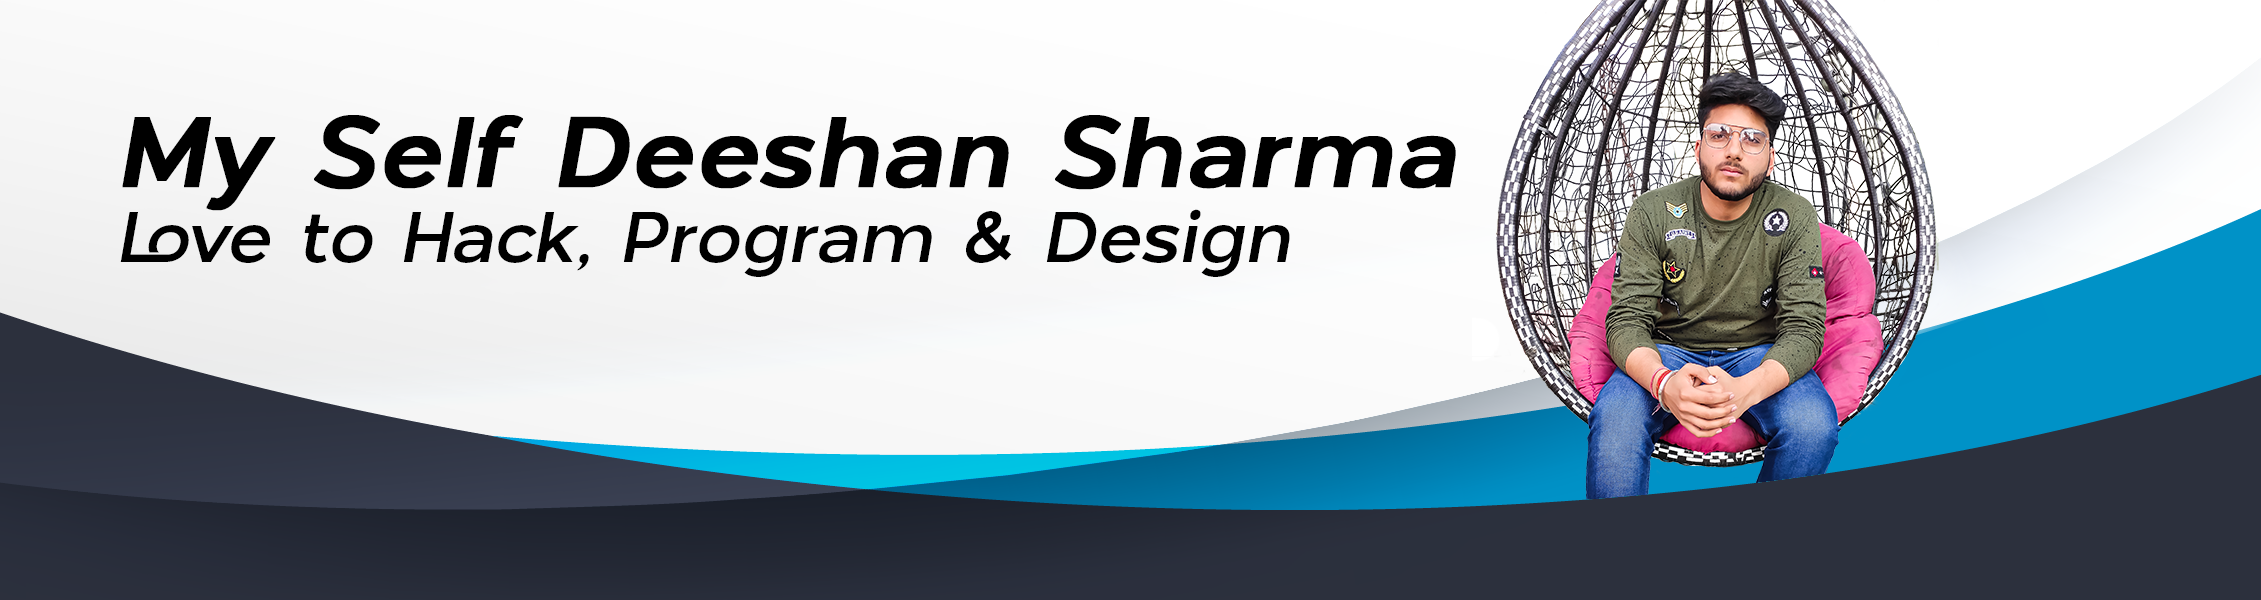 Banner Image About Deeshan Sharma